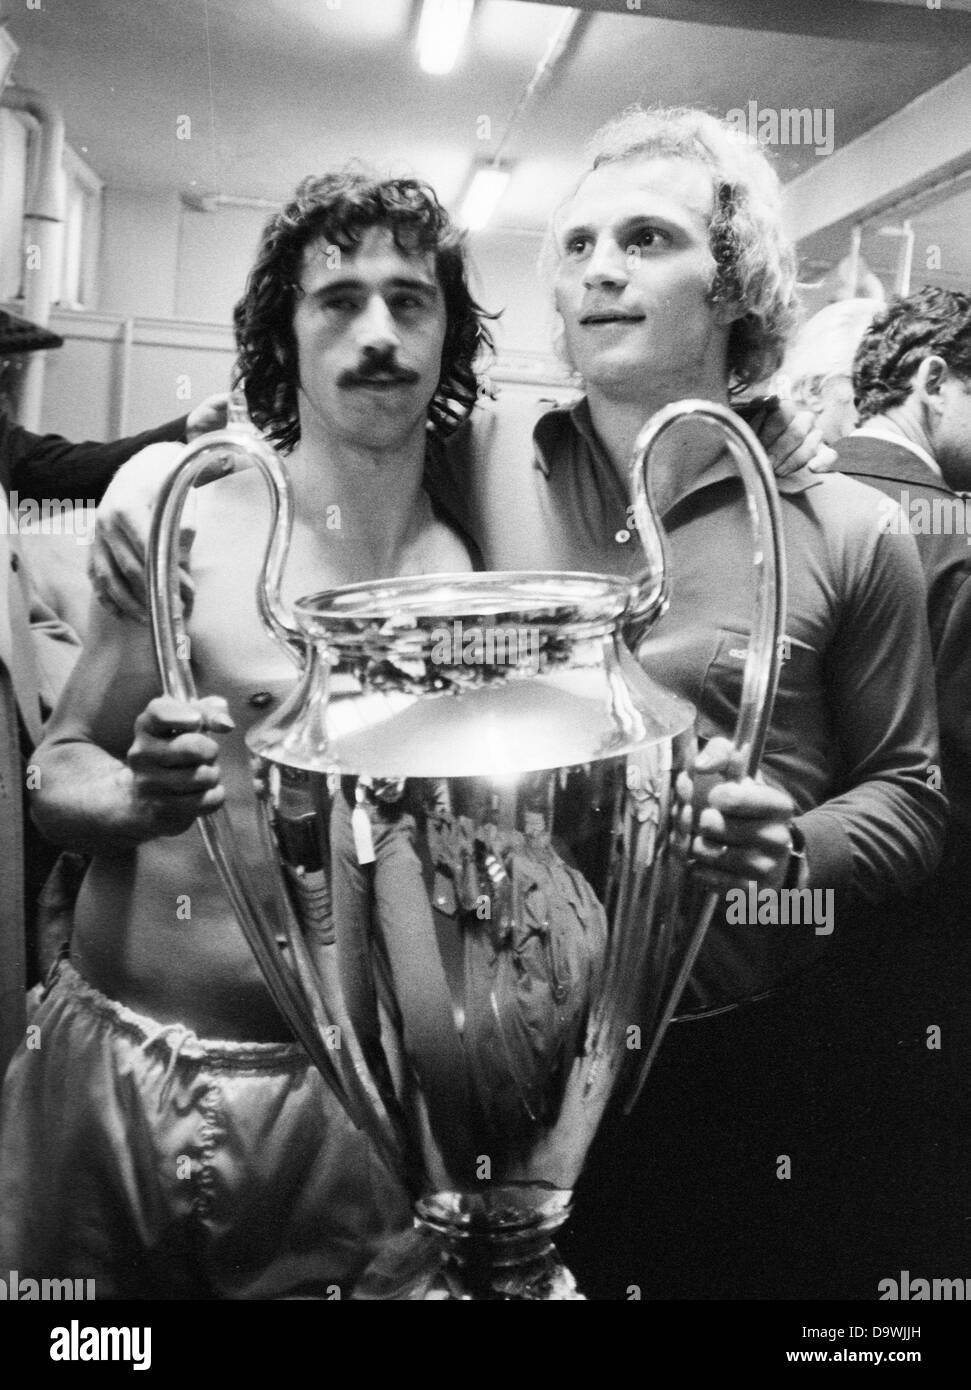 Uli Hoeneß, manager of FC Bayern Munich, will celebrate his 50th birthday on the 05th of January 2002. To be seen on the picture Uli Hoeneß (r) together with Gerd Müller in the year 1974. Stock Photo